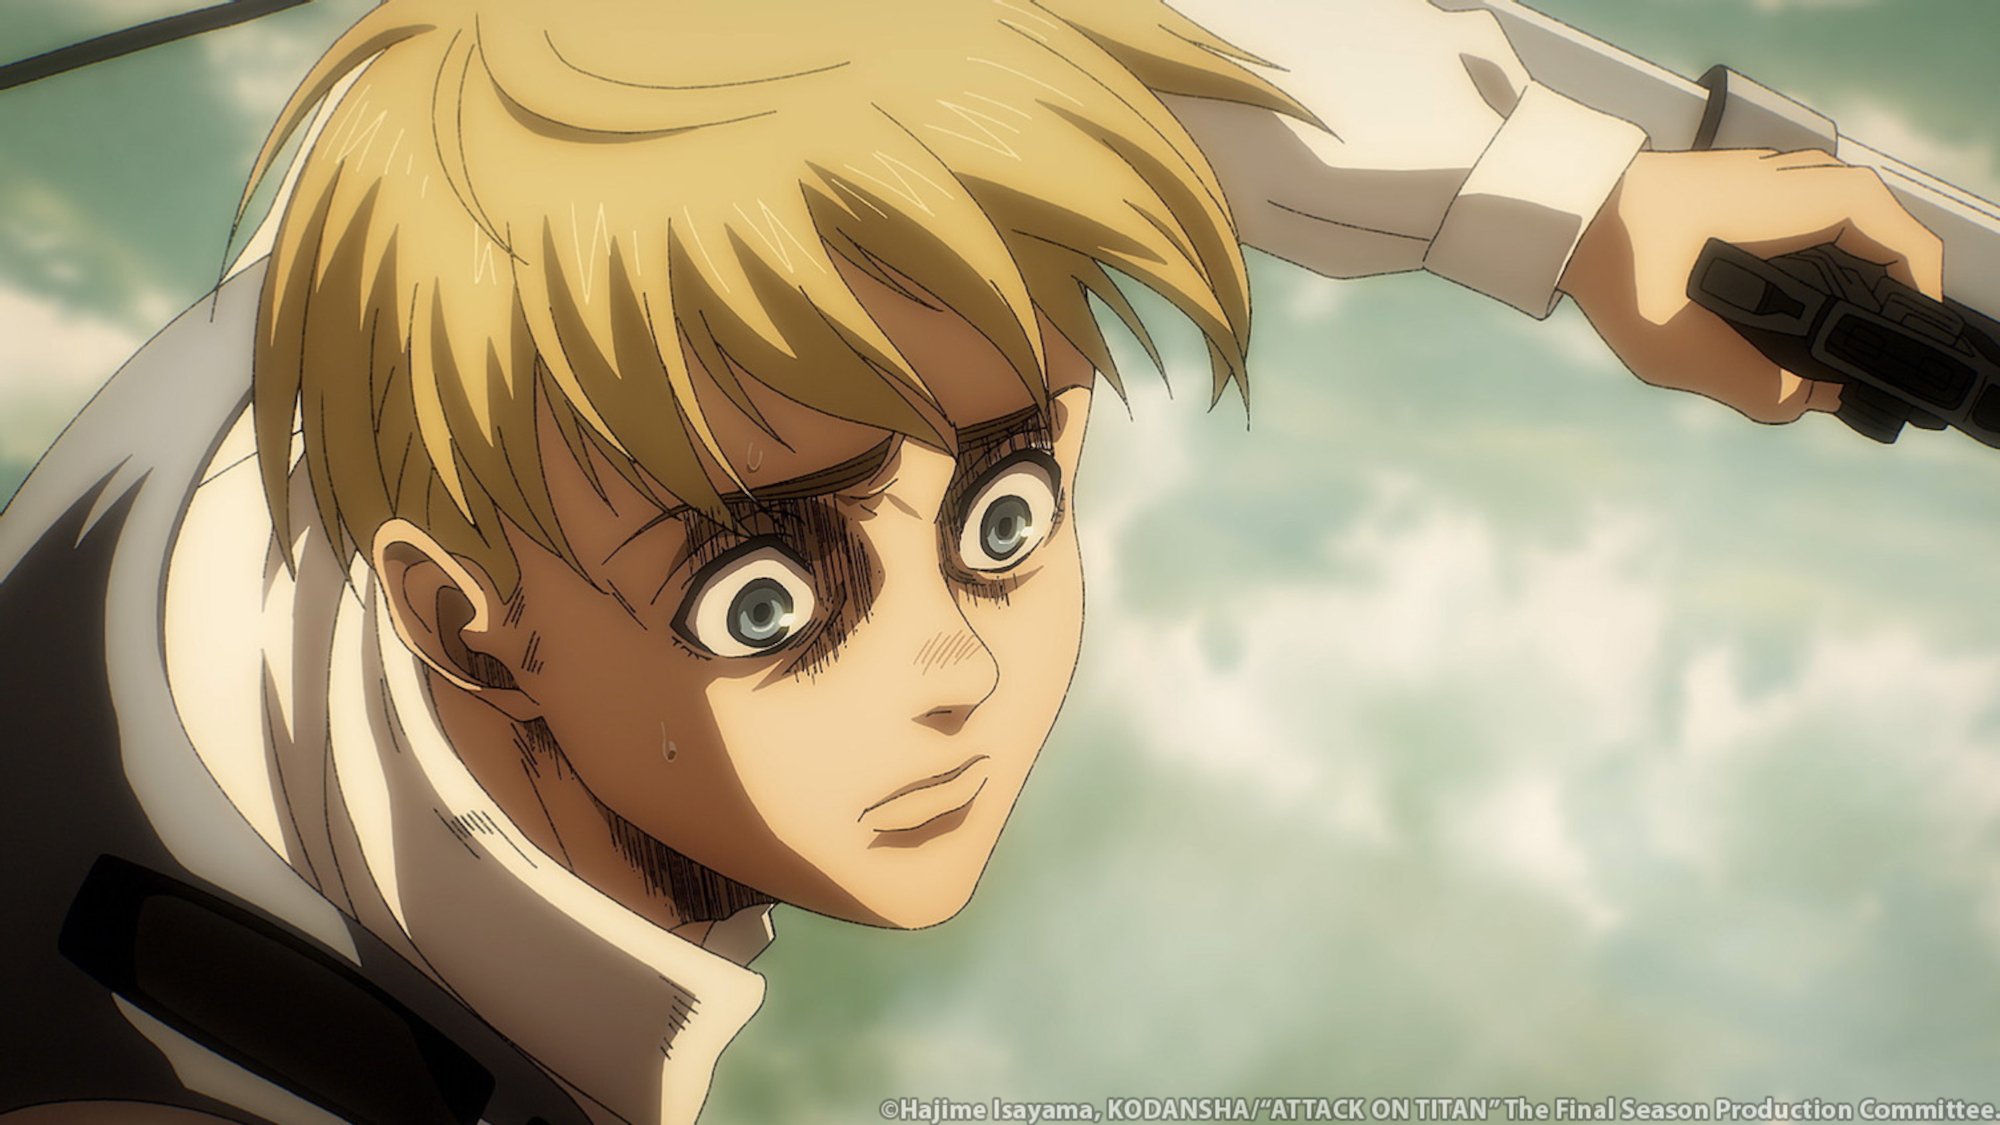 Armin Arlert in 'Attack on Titan' Season 4 Part 2. He's in the air using his ODM gear.